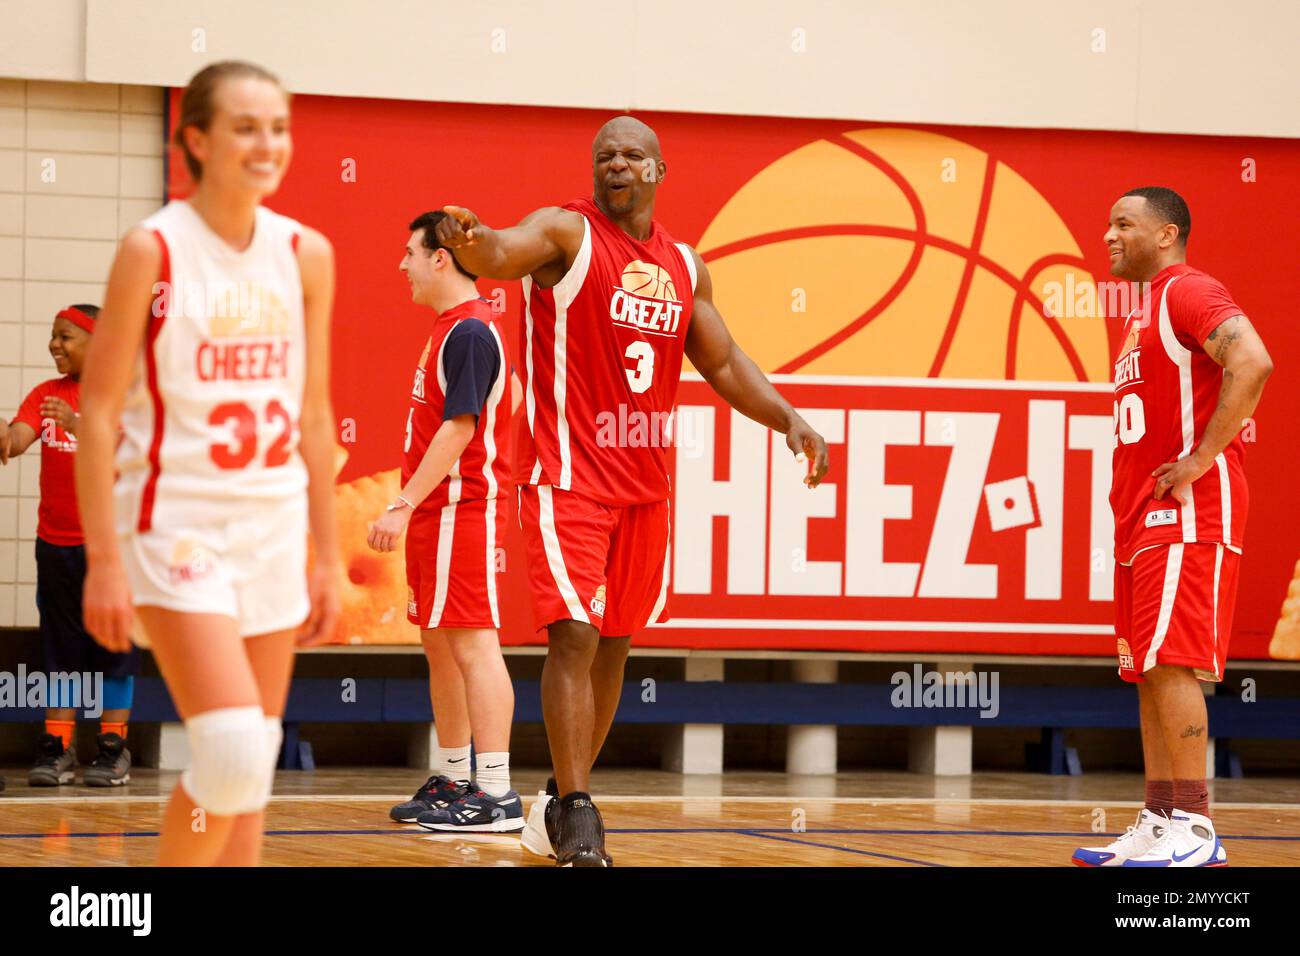 IMAGE DISTRIBUTED FOR KELLOGG'S - Terry Crews goofs off on the court  Sunday, April 3, 2016 in Houston at "Munch Mania". Kellogg's Cheez-It brand  has launched a college basketball promotion called "Munch